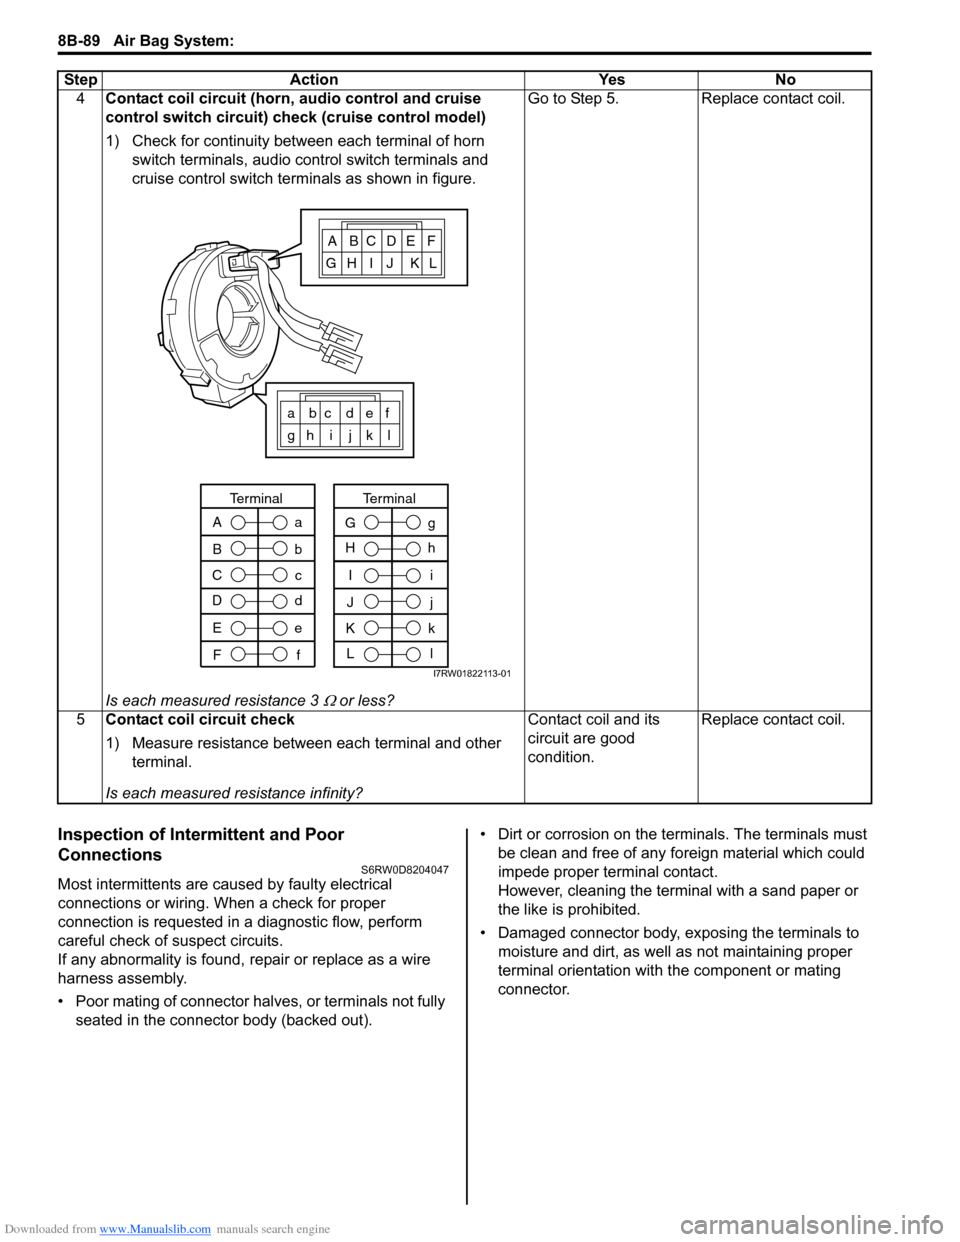 SUZUKI SX4 2006 1.G Service Workshop Manual Downloaded from www.Manualslib.com manuals search engine 8B-89 Air Bag System: 
Inspection of Intermittent and Poor 
Connections
S6RW0D8204047
Most intermittents are caused by faulty electrical 
conne